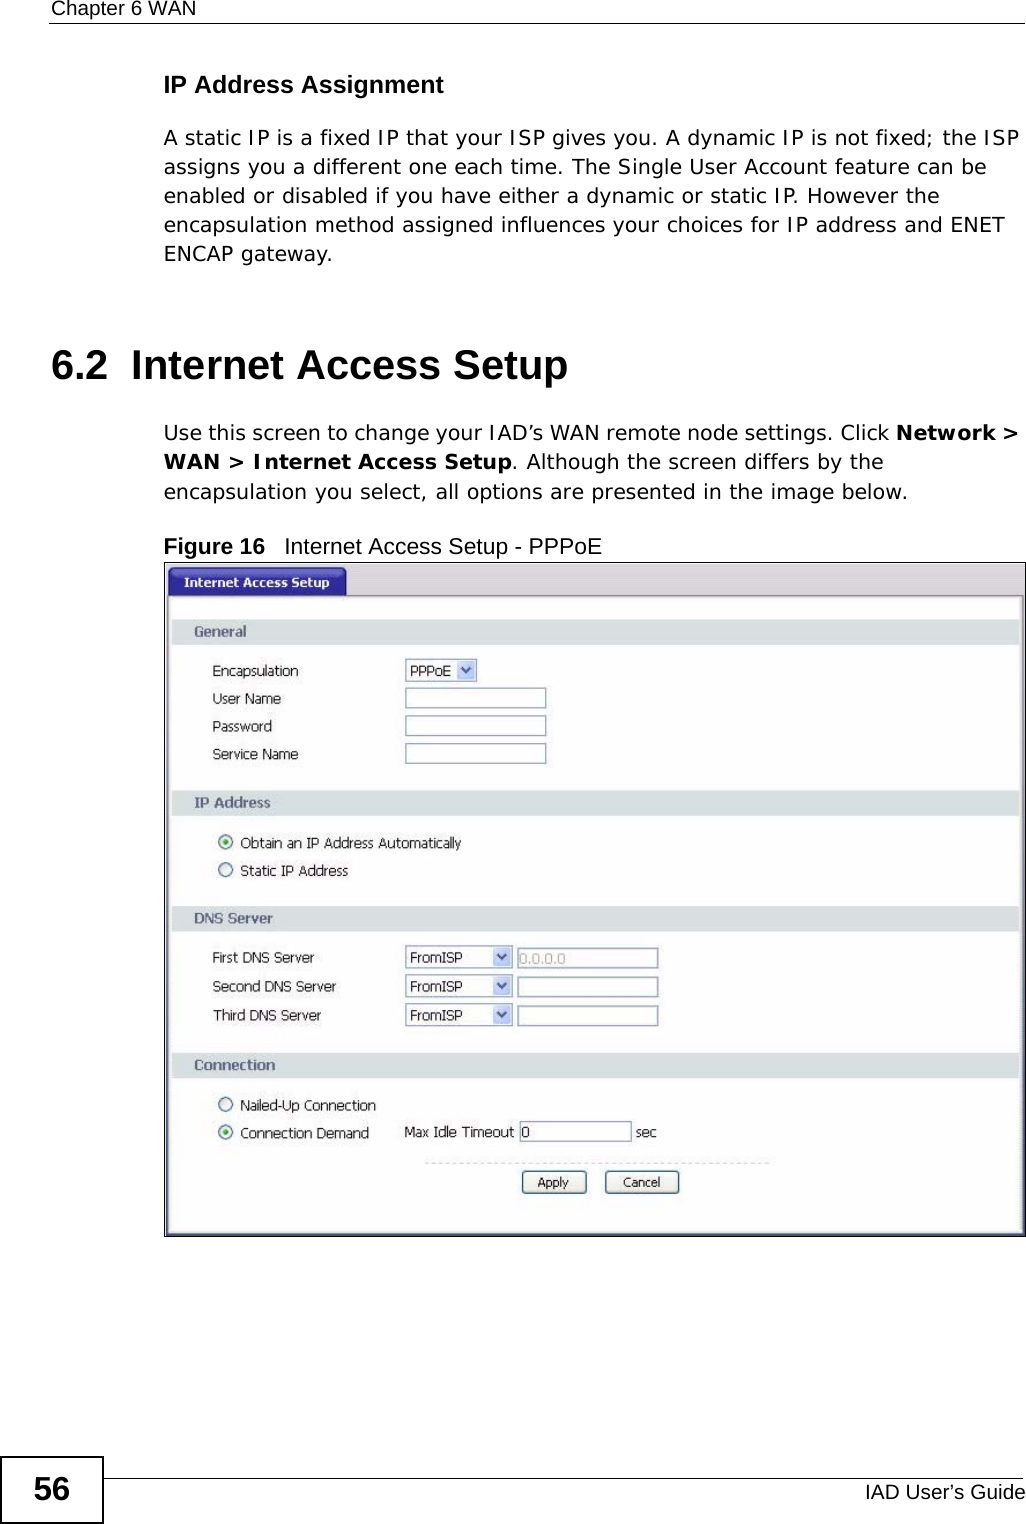 Chapter 6 WANIAD User’s Guide56IP Address AssignmentA static IP is a fixed IP that your ISP gives you. A dynamic IP is not fixed; the ISP assigns you a different one each time. The Single User Account feature can be enabled or disabled if you have either a dynamic or static IP. However the encapsulation method assigned influences your choices for IP address and ENET ENCAP gateway.6.2  Internet Access Setup Use this screen to change your IAD’s WAN remote node settings. Click Network &gt; WAN &gt; Internet Access Setup. Although the screen differs by the encapsulation you select, all options are presented in the image below.Figure 16   Internet Access Setup - PPPoE